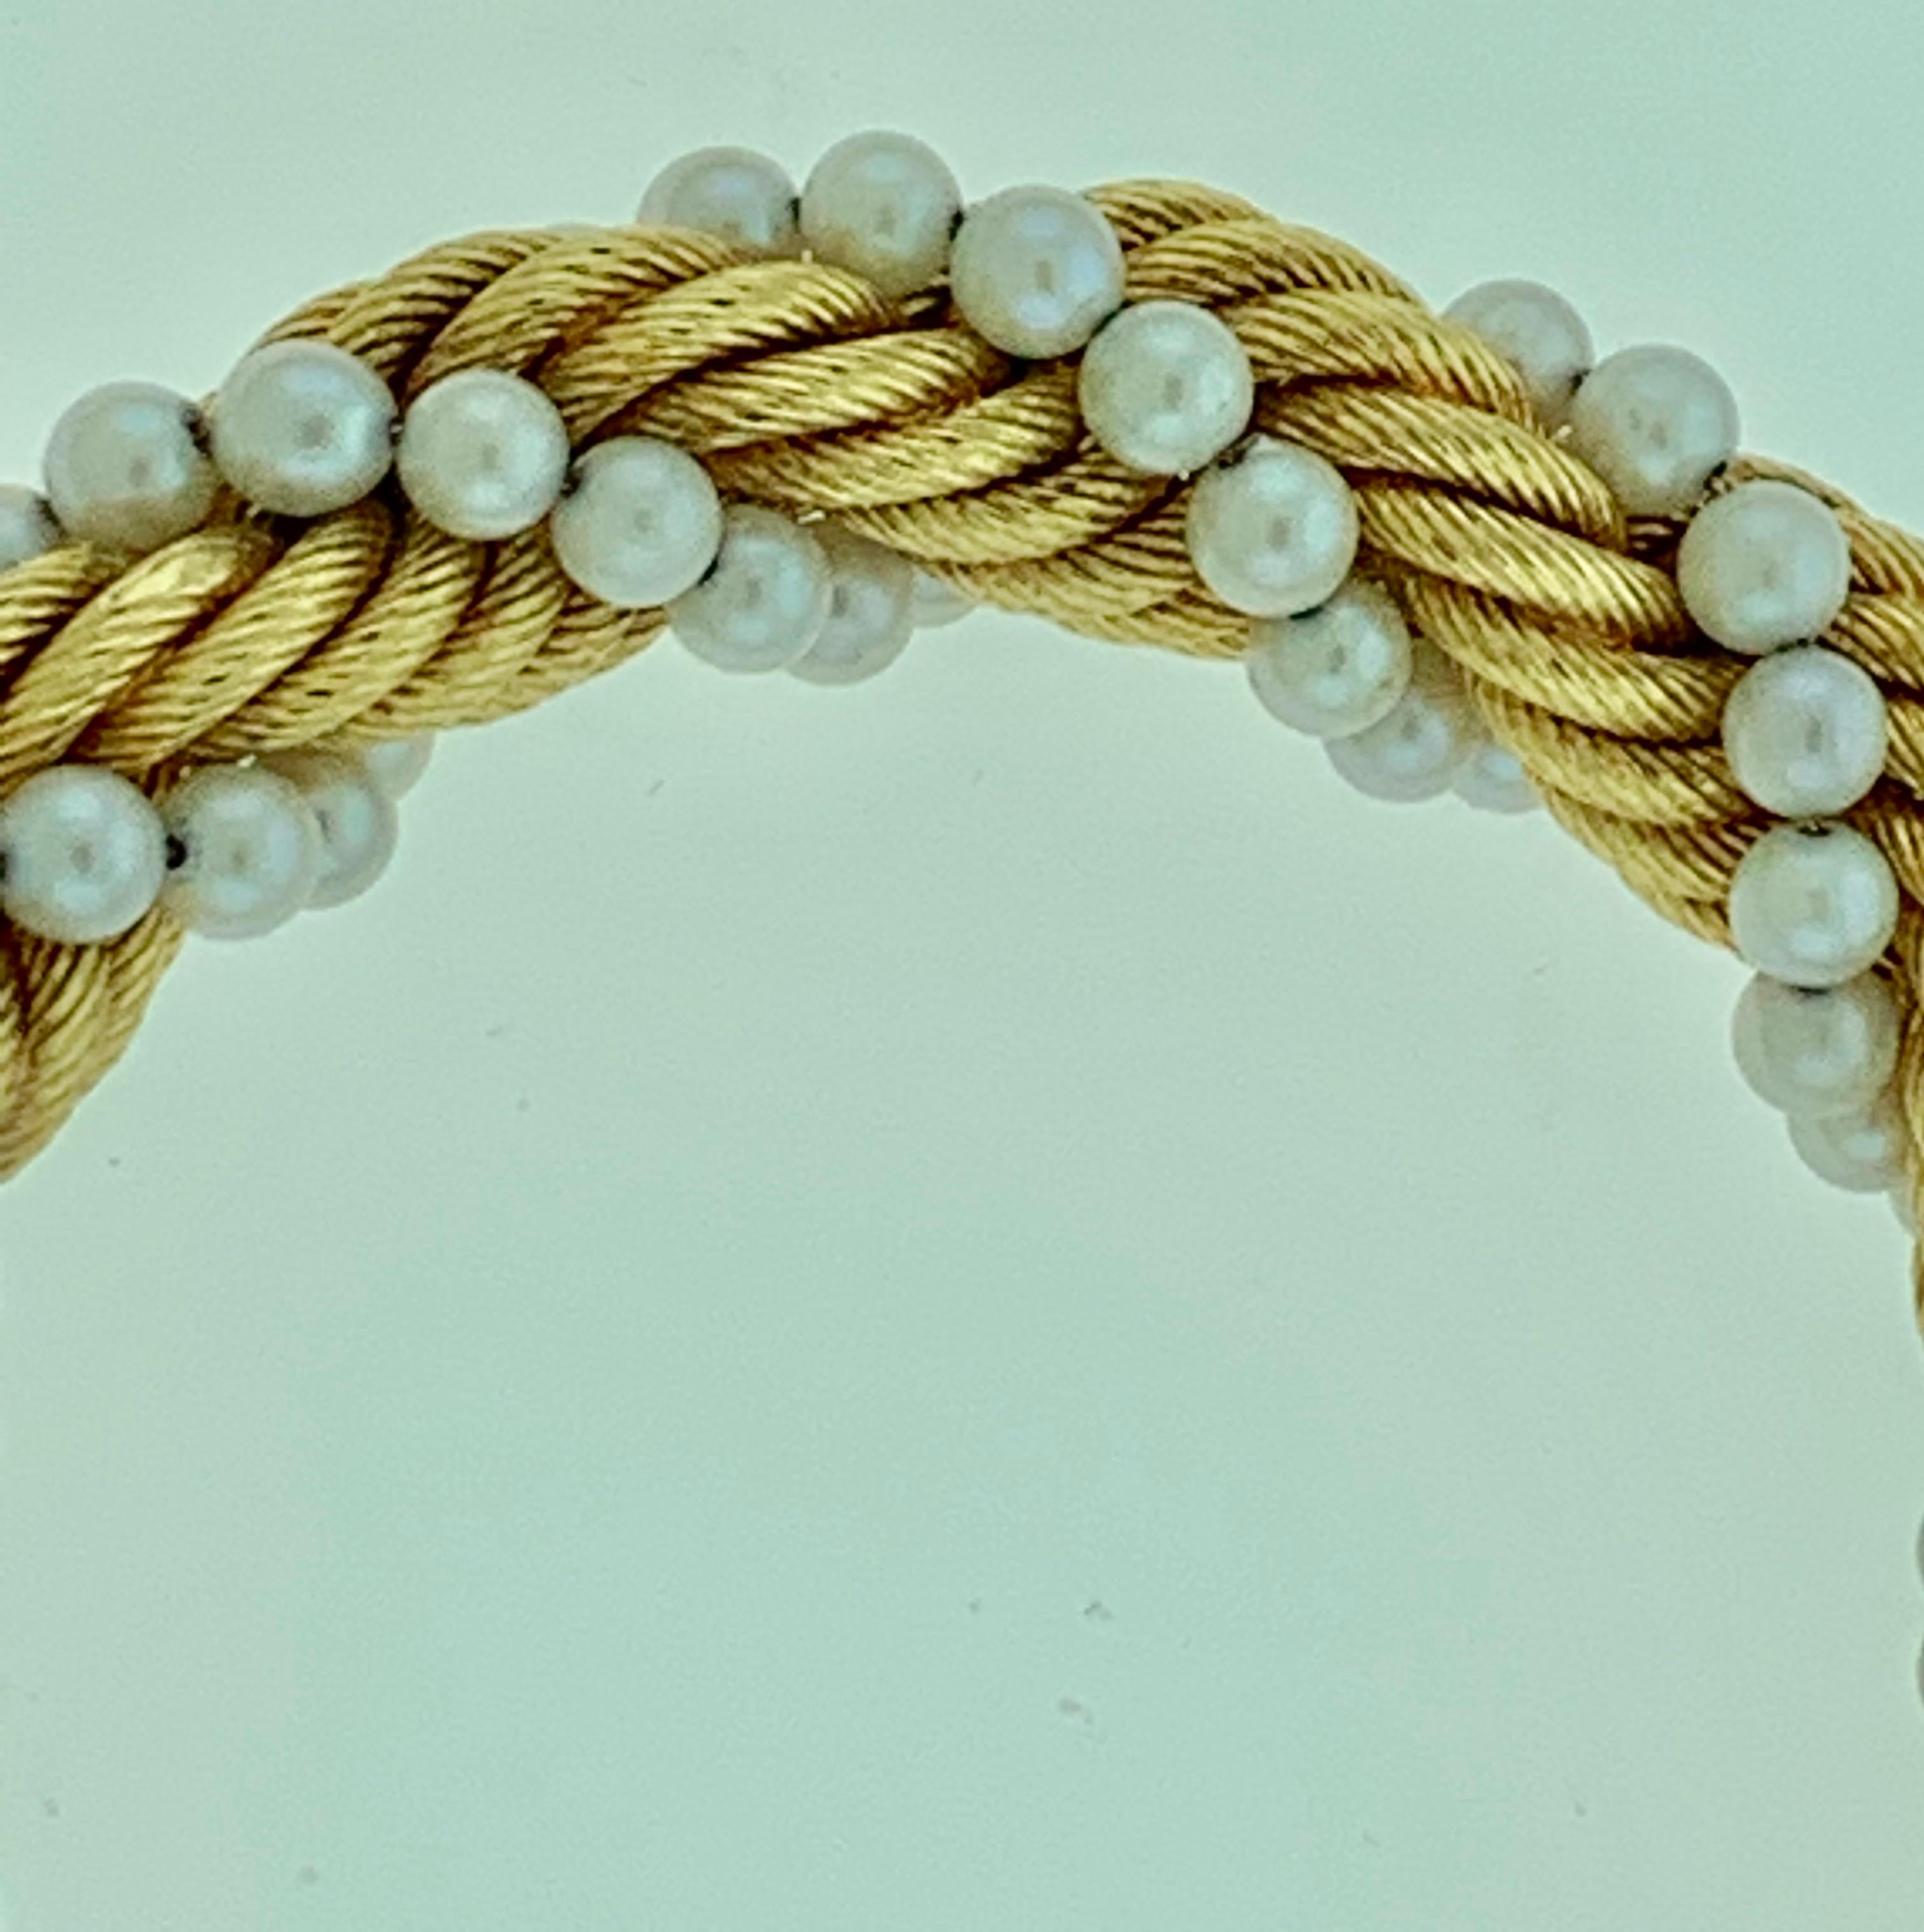 Bucherer Two-Piece Necklace and Bracelet Set in 18 Karat Yellow Gold and Pearls In Excellent Condition For Sale In New York, NY